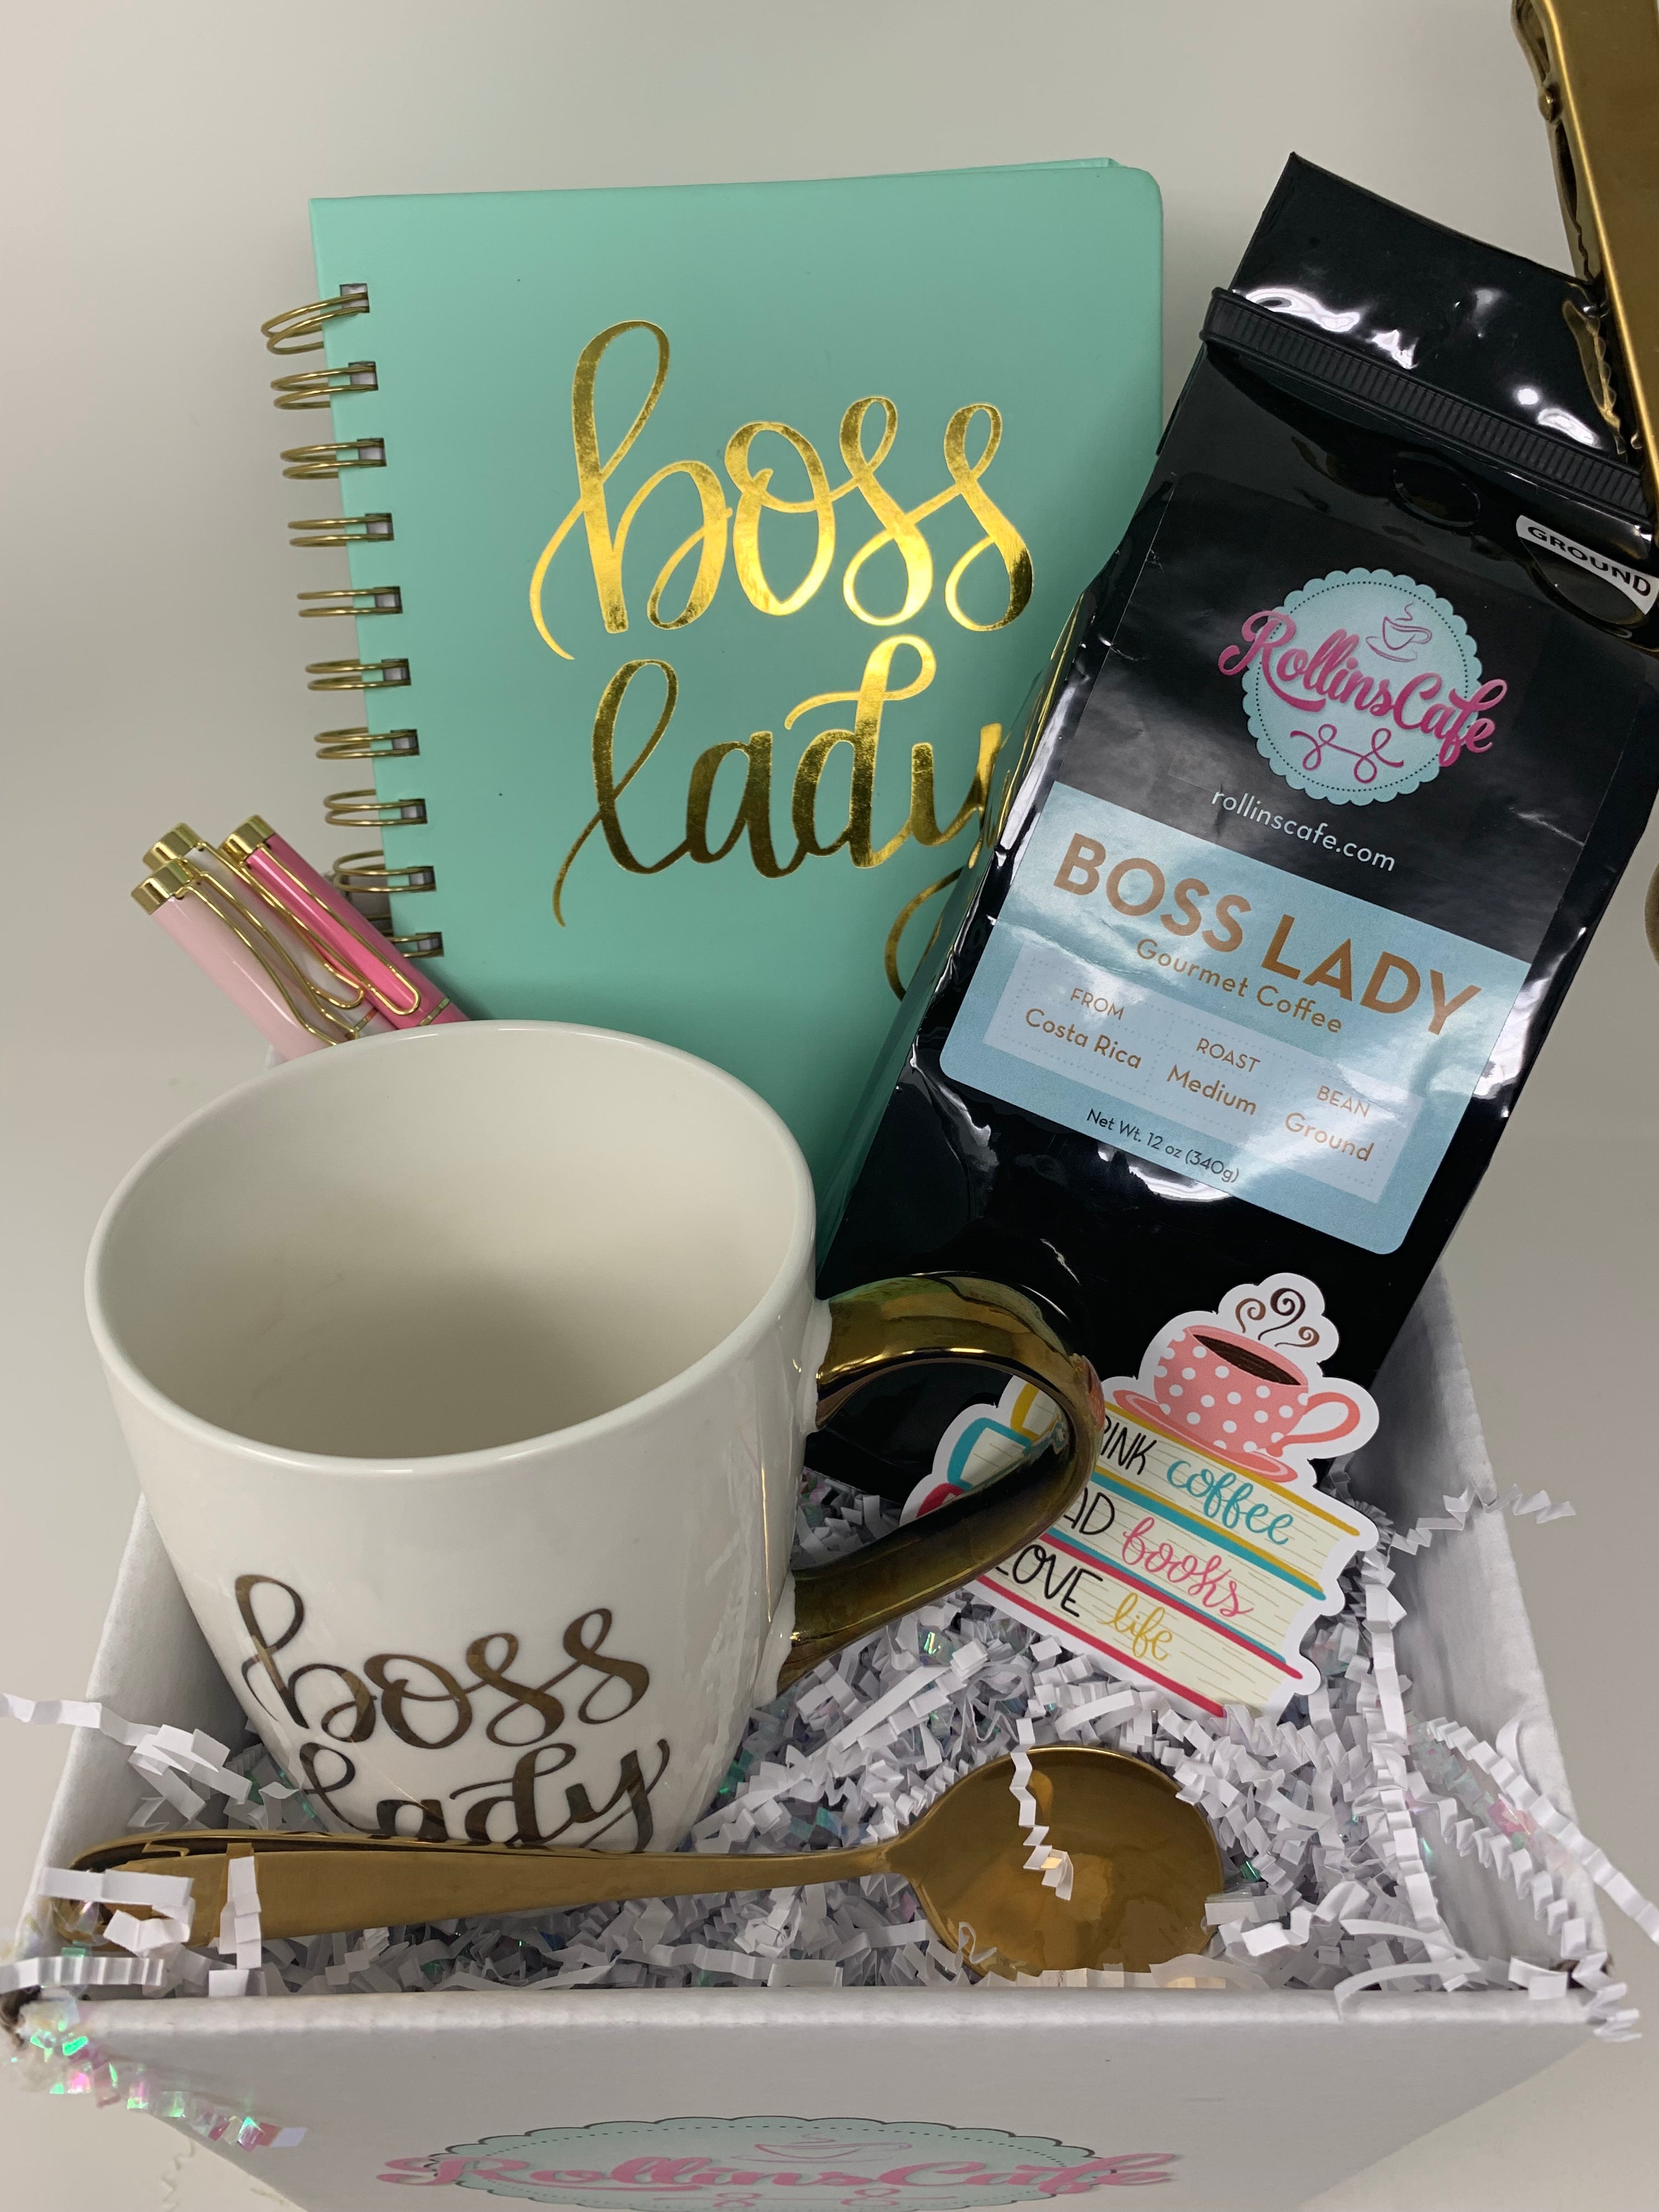 Boss Lady Coffee Lovers Gift Set with Costa Rican Ground Coffee Mug Journal Pens and Scoop Clip - RollinsCafe